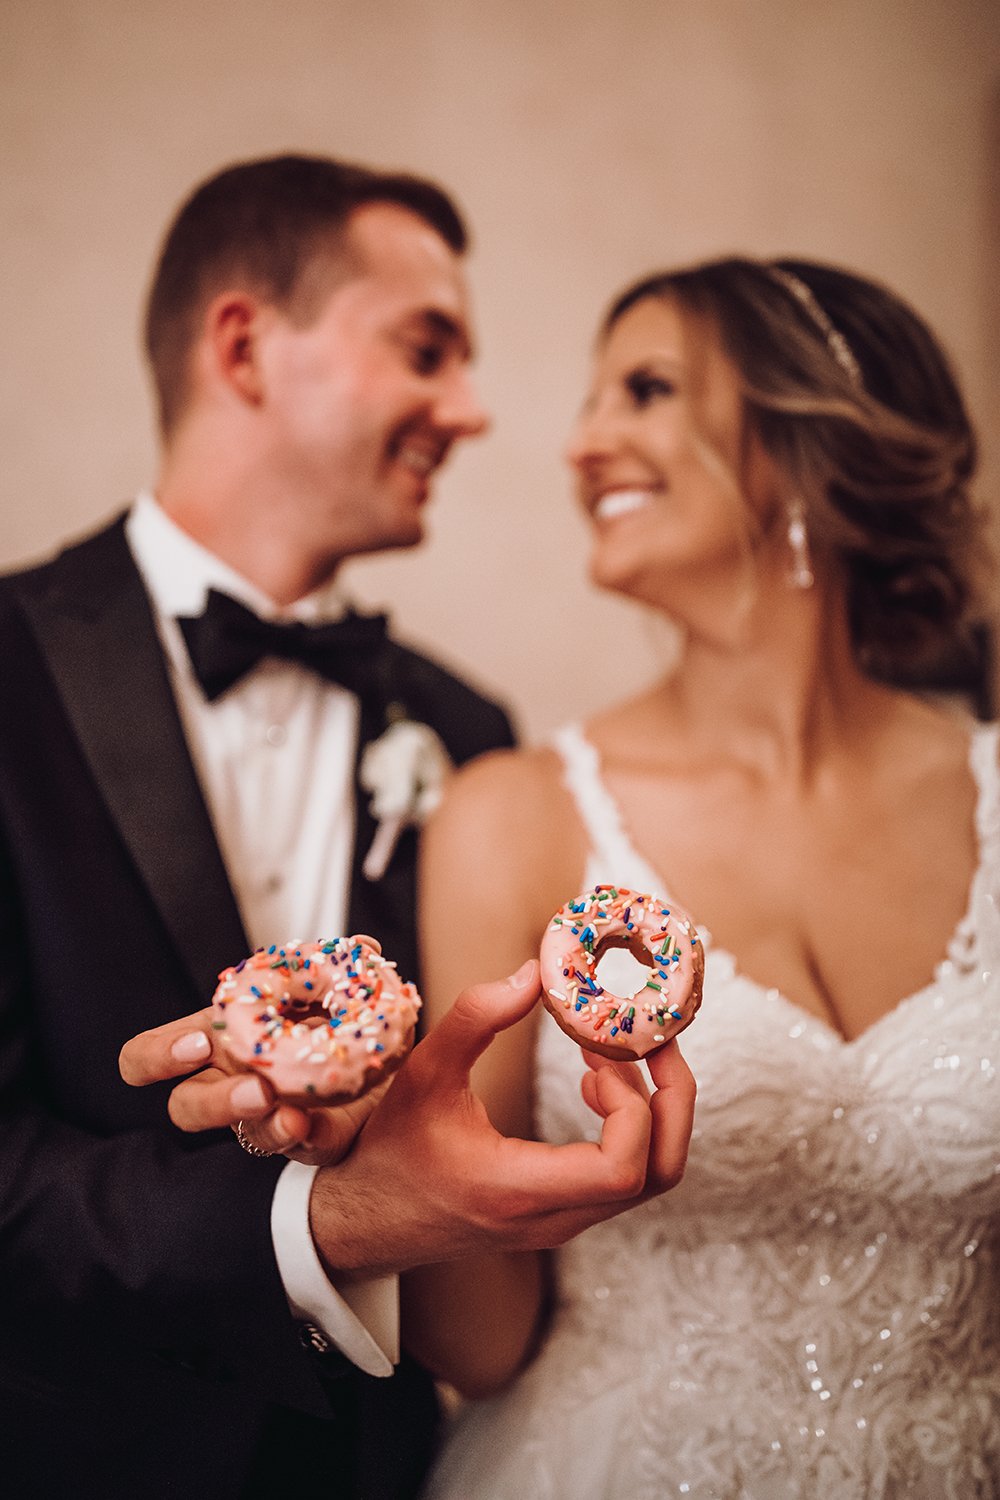 mini ring donuts - cute treats for the bride and groom - desserts